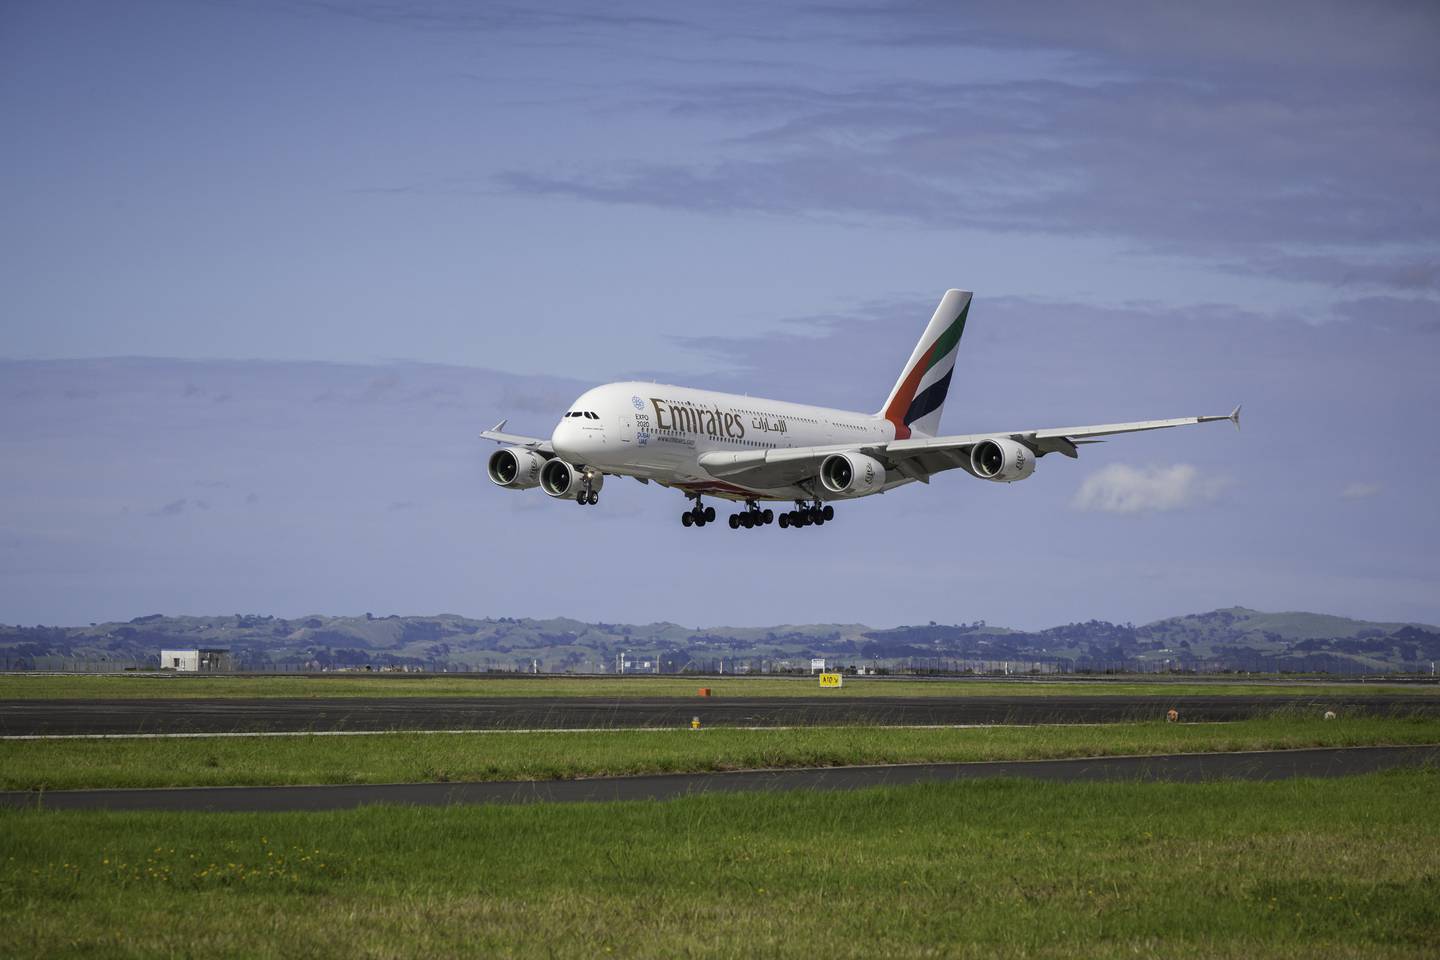 Emirates has several destinations on offer this January. Photo: Emirates